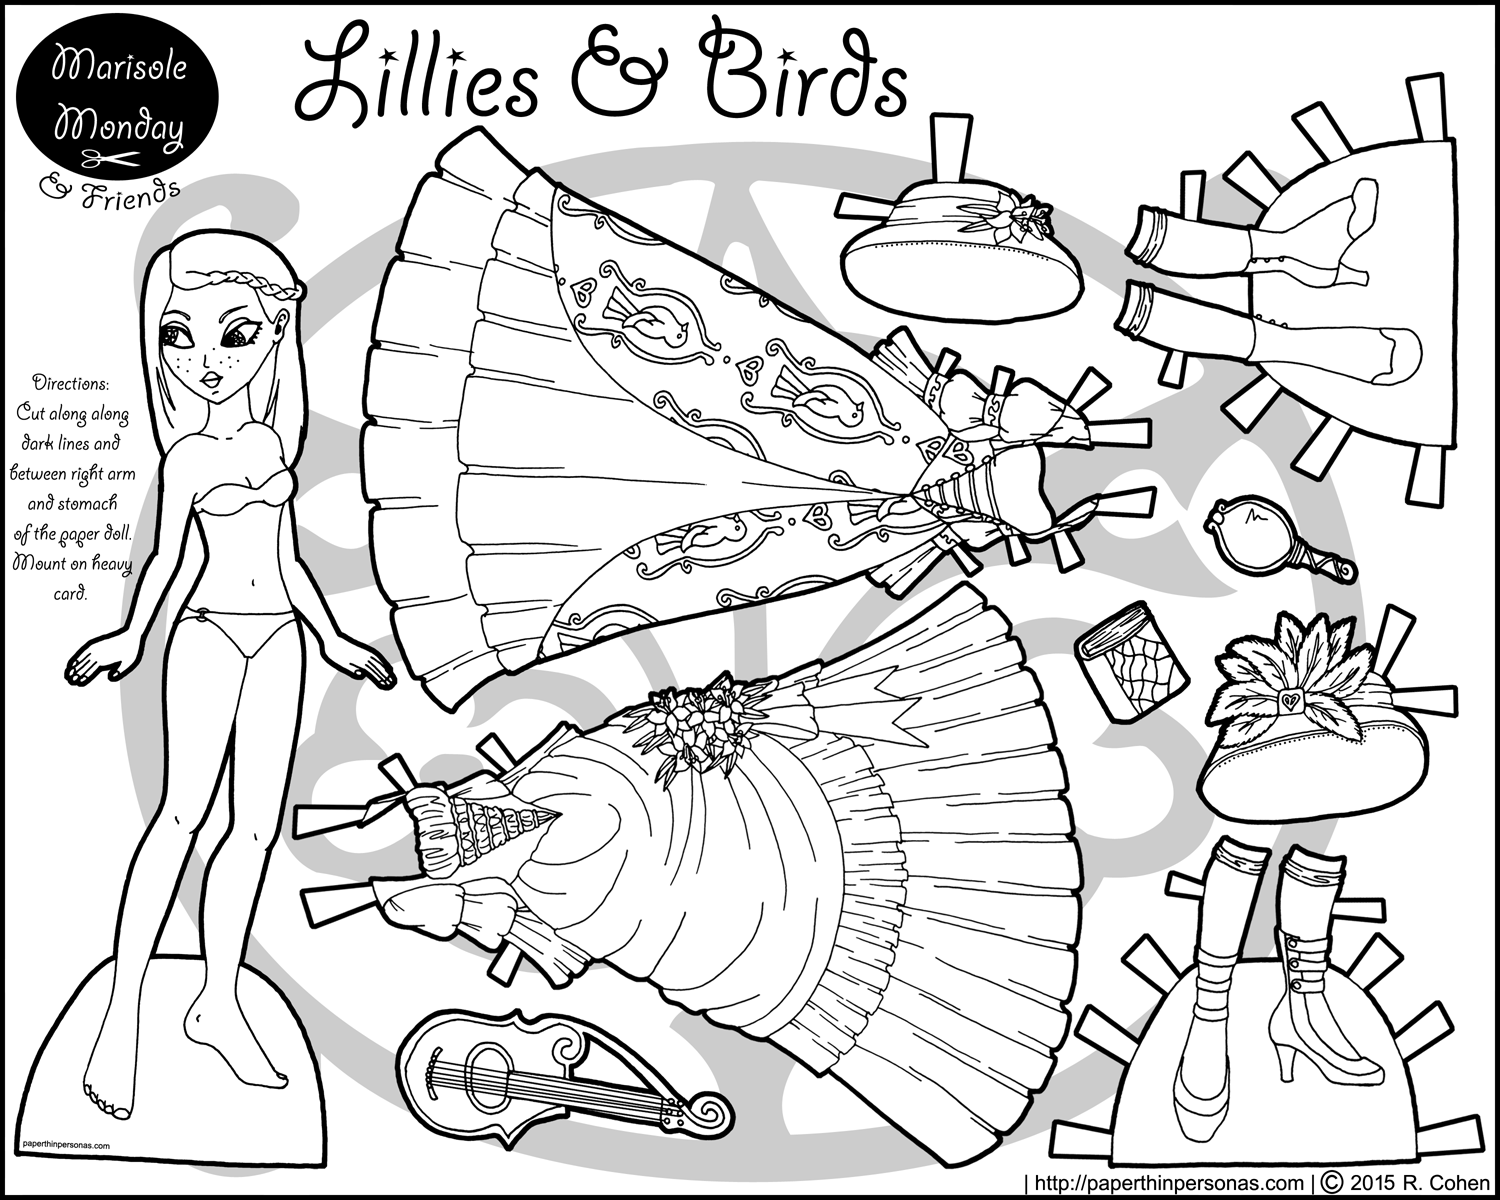 Lillies birds a printable paper doll coloring page â paper thin personas